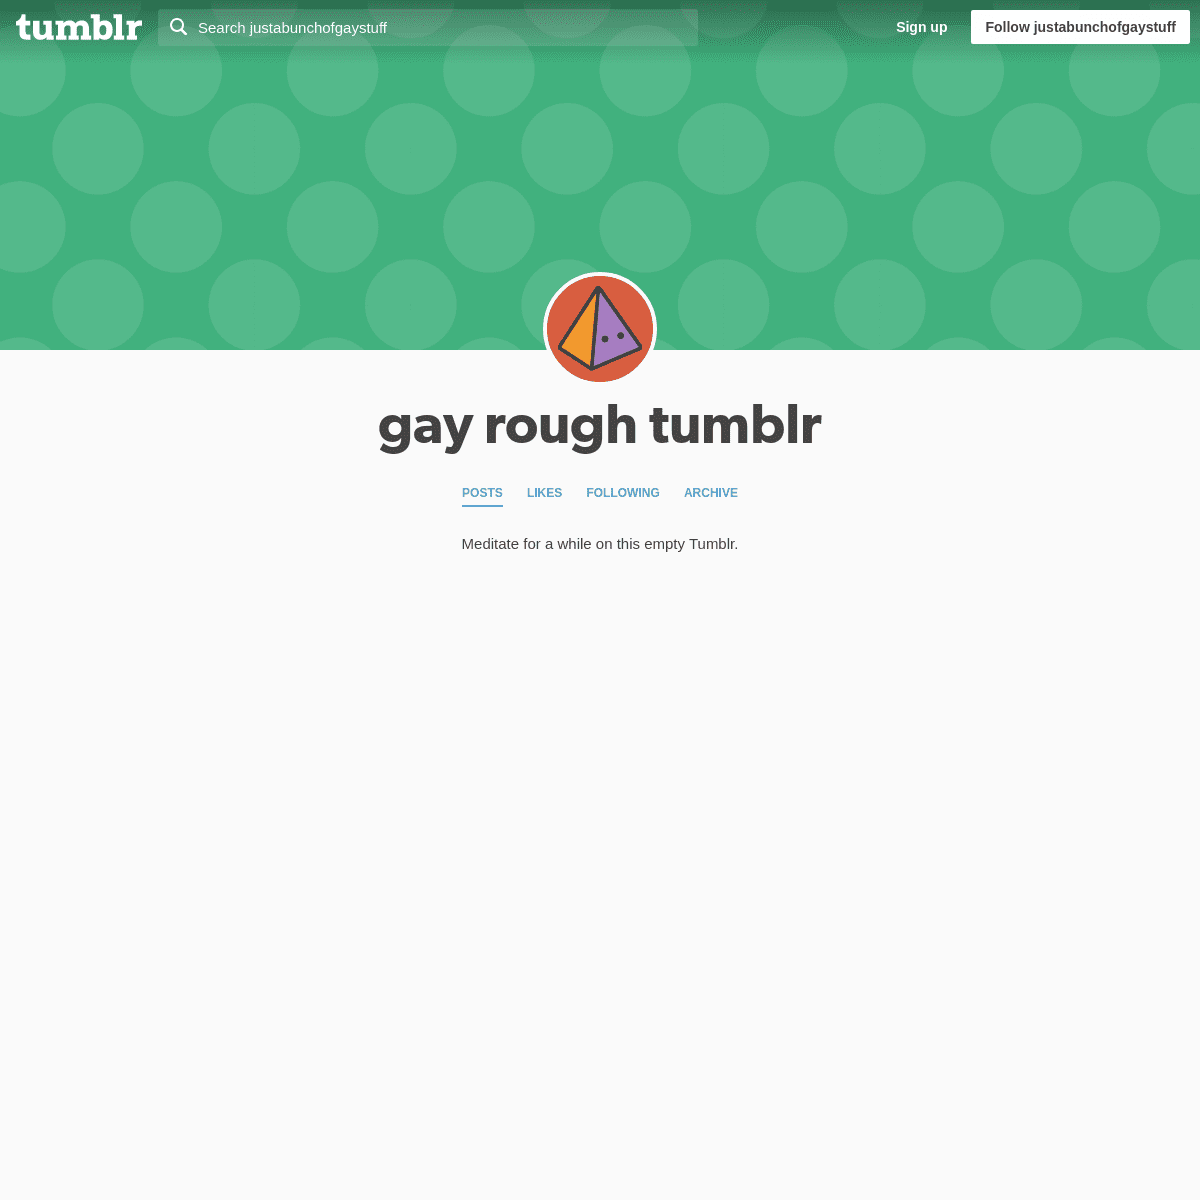 A complete backup of justabunchofgaystuff.tumblr.com